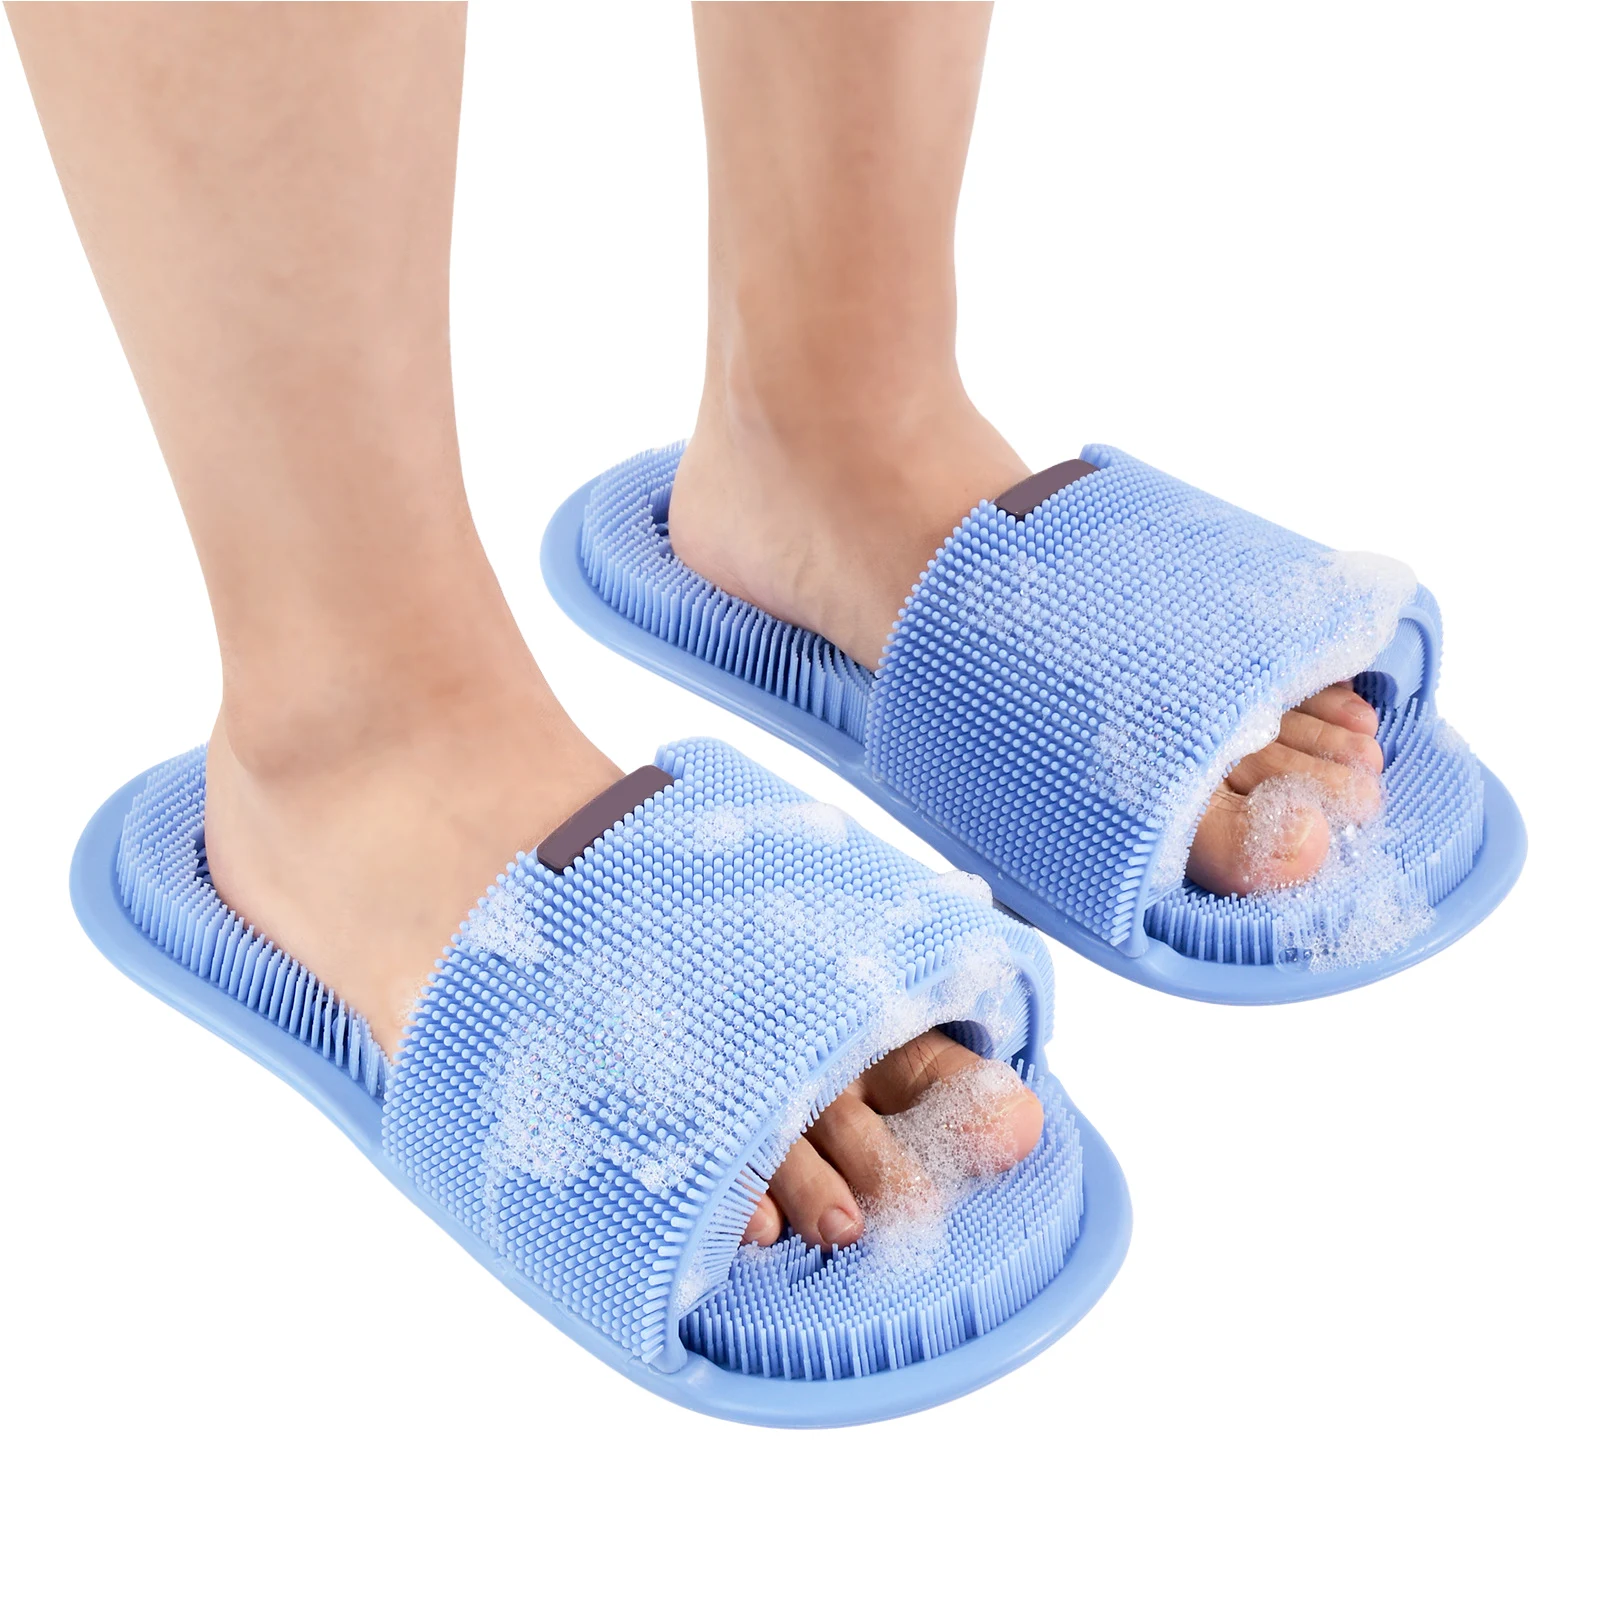 Magic Foot Washing Slippers Bathroom Men's And Women's Bath Anti-skid Silicone Slippers Foot Rubbing Massage Cleaning Brush